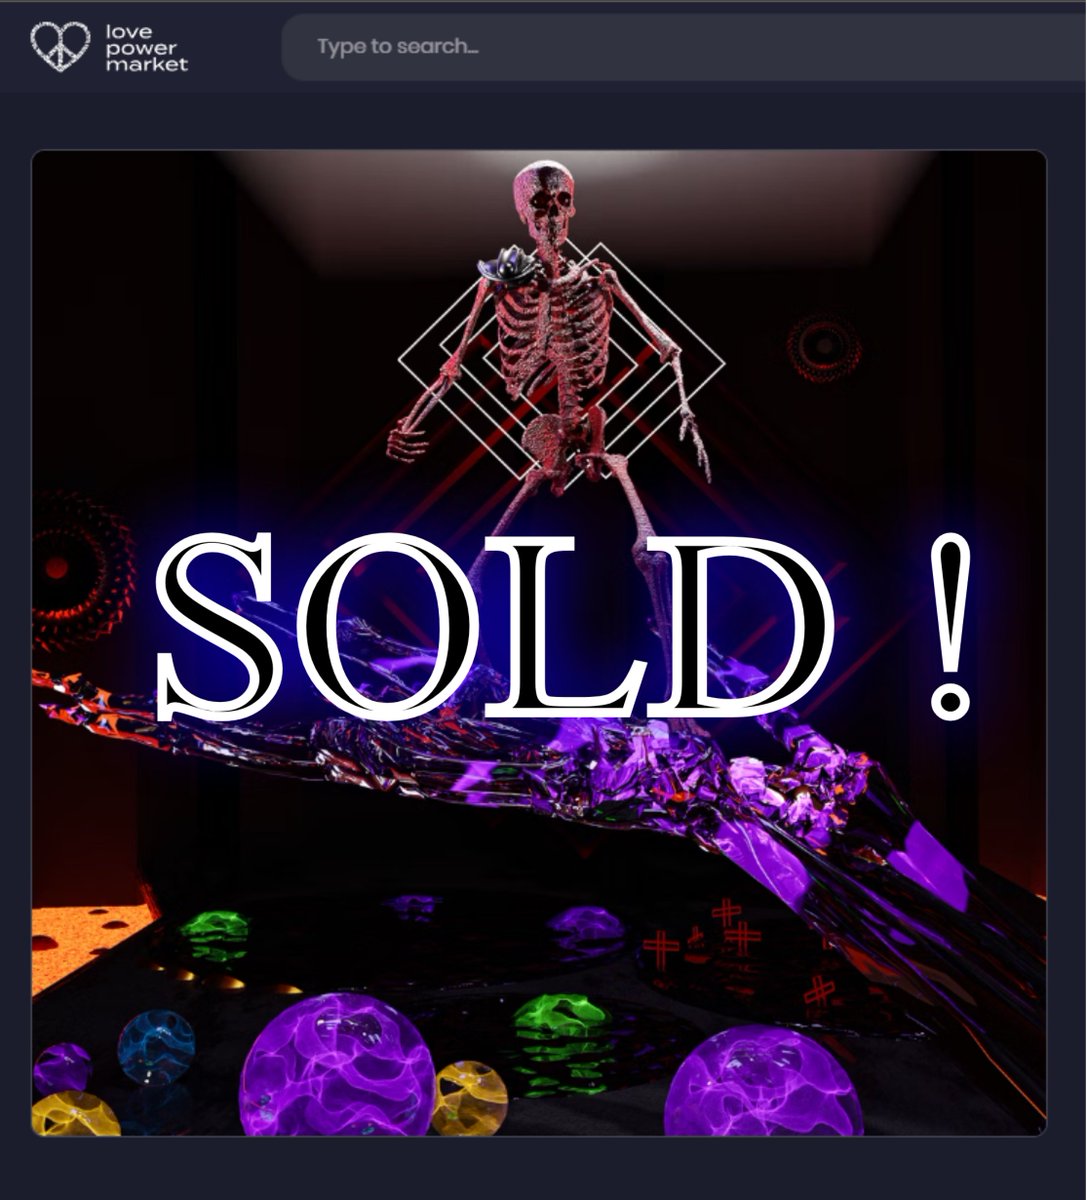 Gm everyone 🤩🌤️ annddd SOLD !! ❤️‍🔥 Thank you so much @LovePowerCoin for collecting 'Crystal hell' on the LP Market place. The Wave of support has been truly blissful #LoveSupports ❤️